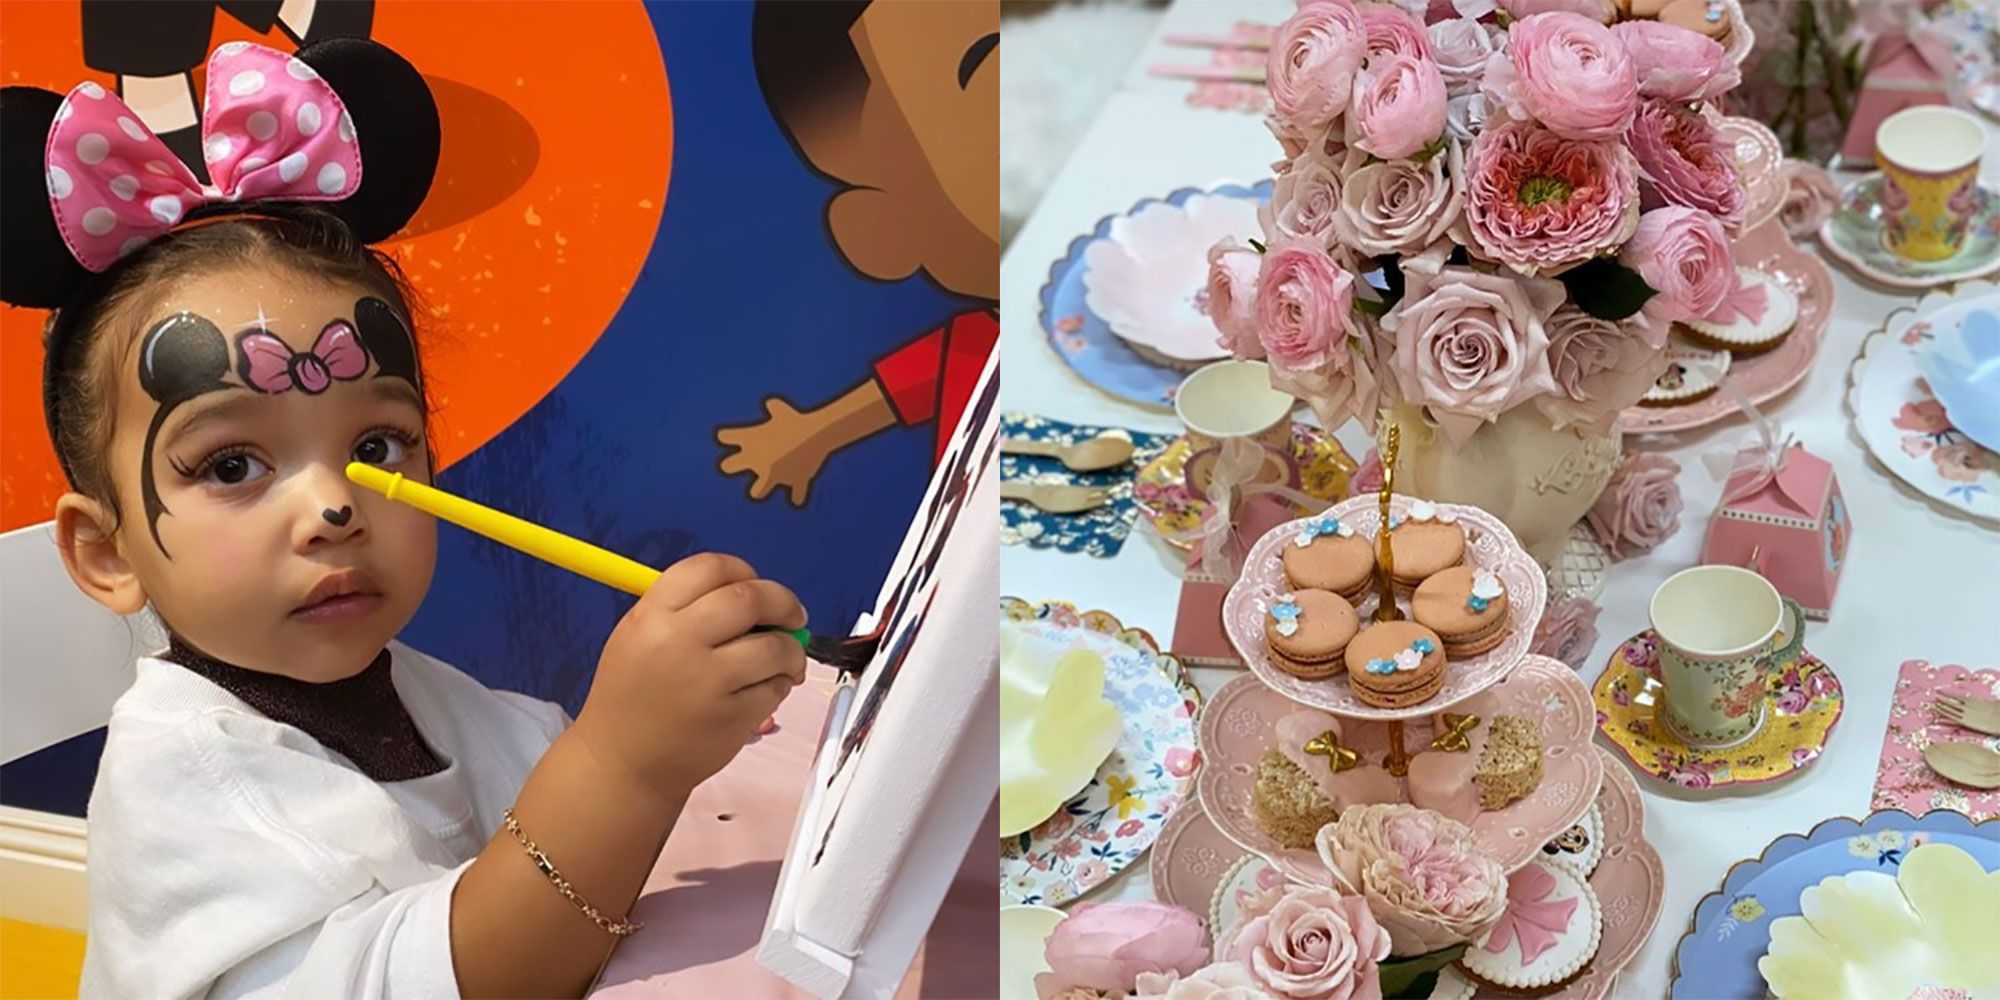 What Chicago West's 2nd Birthday Party Was Like - Minnie Mouse Decor and Photos